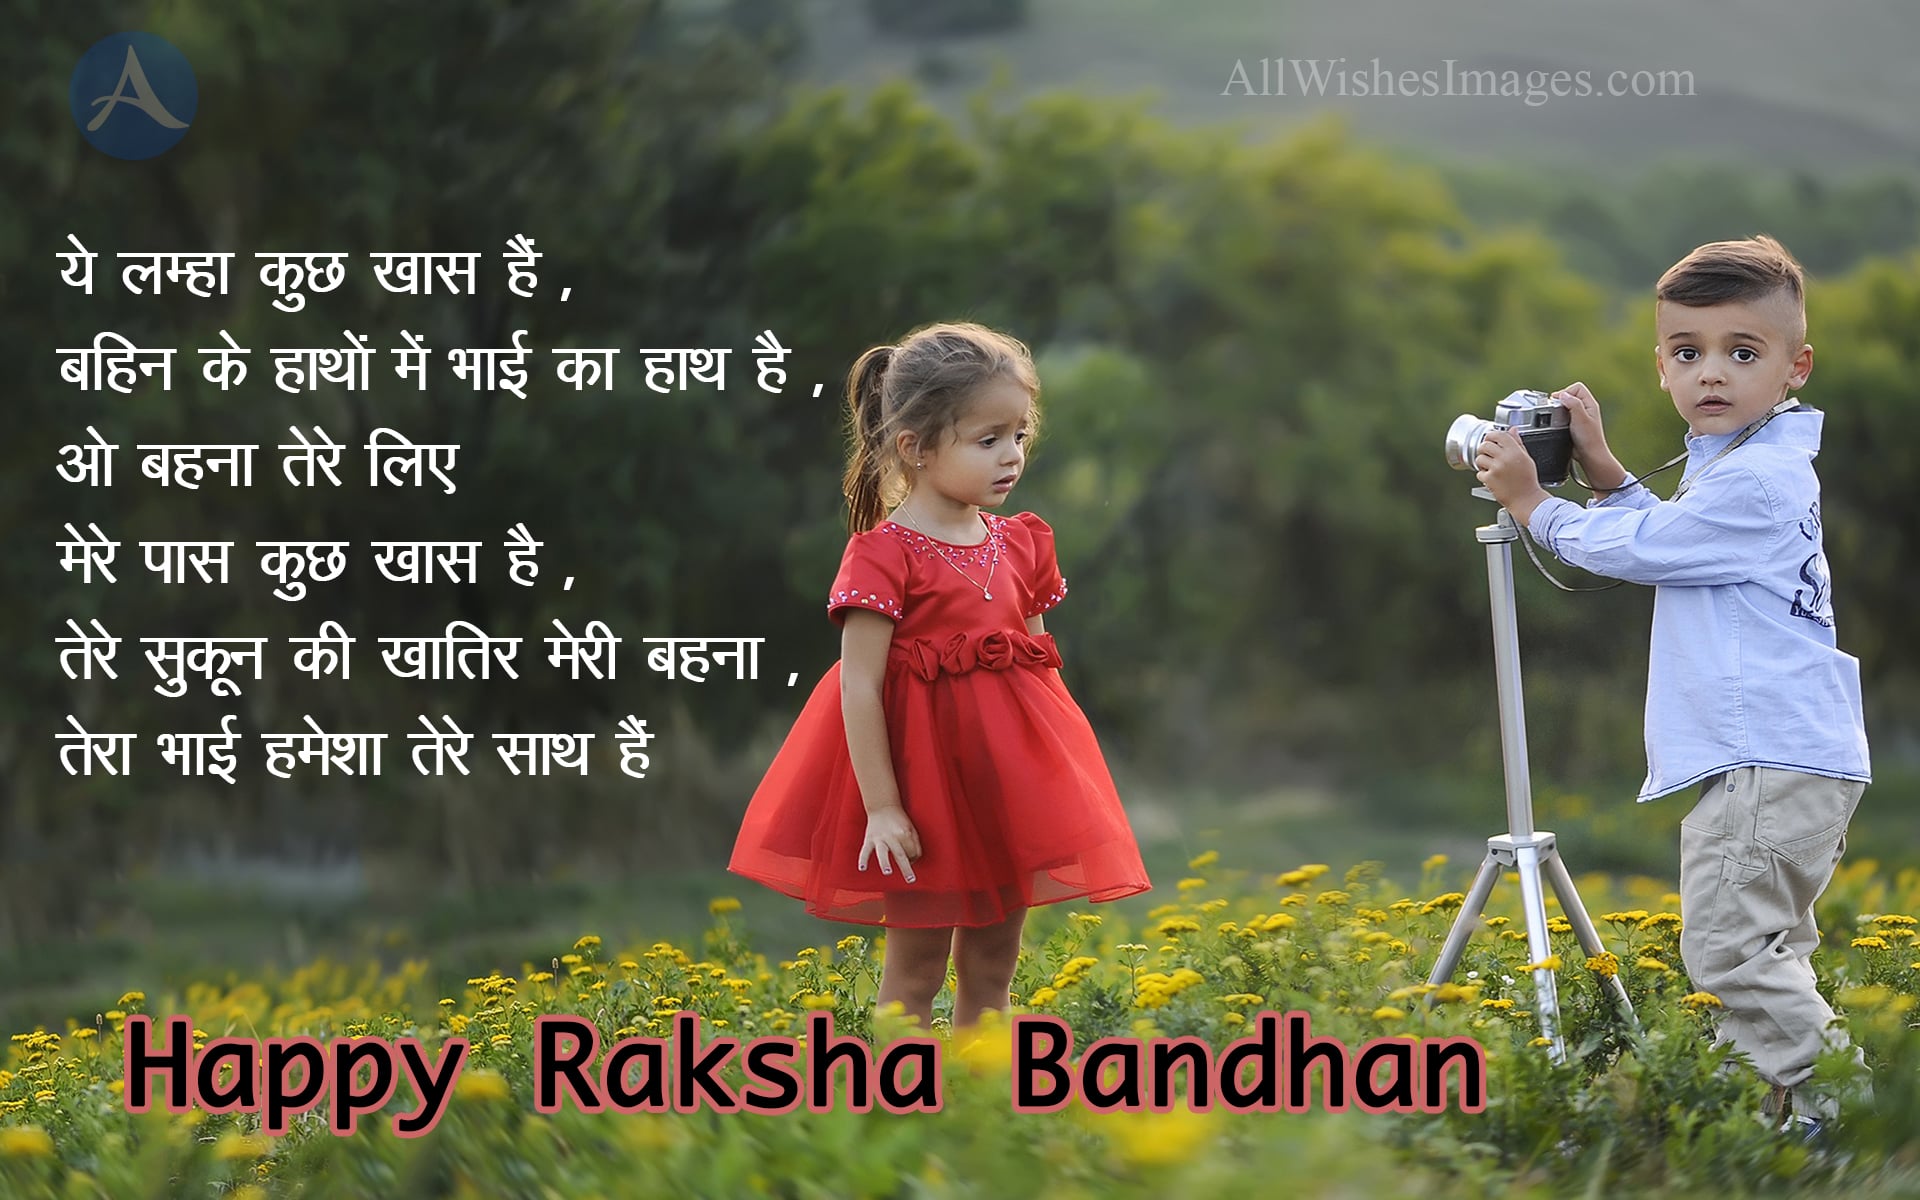 Raksha Bandhan Wishes Images copy - All Wishes Images - Images for WhatsApp